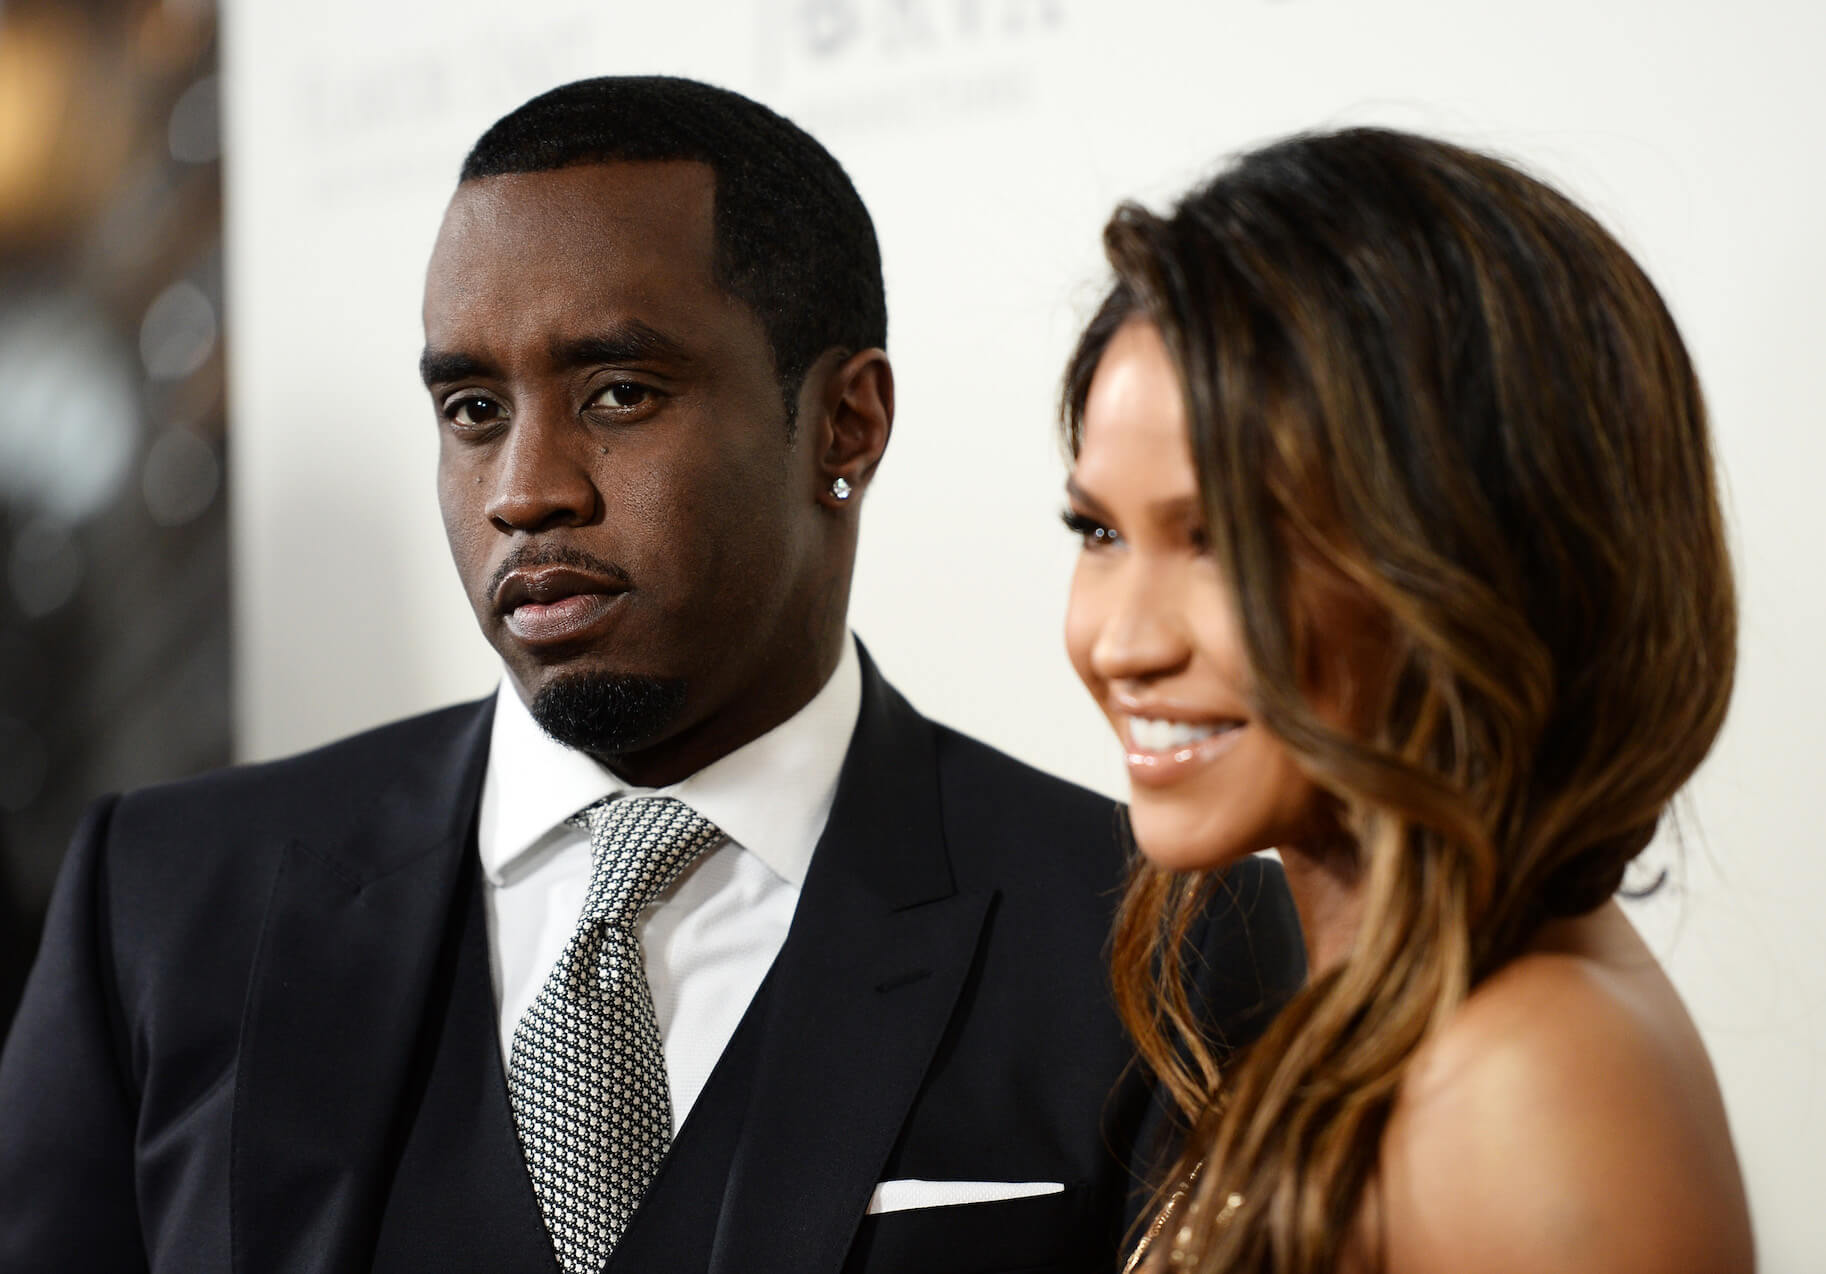 Sean 'P. Diddy' Combs next to Casandra 'Cassie' Ventura, who is laughing, in 2016 at a movie premiere